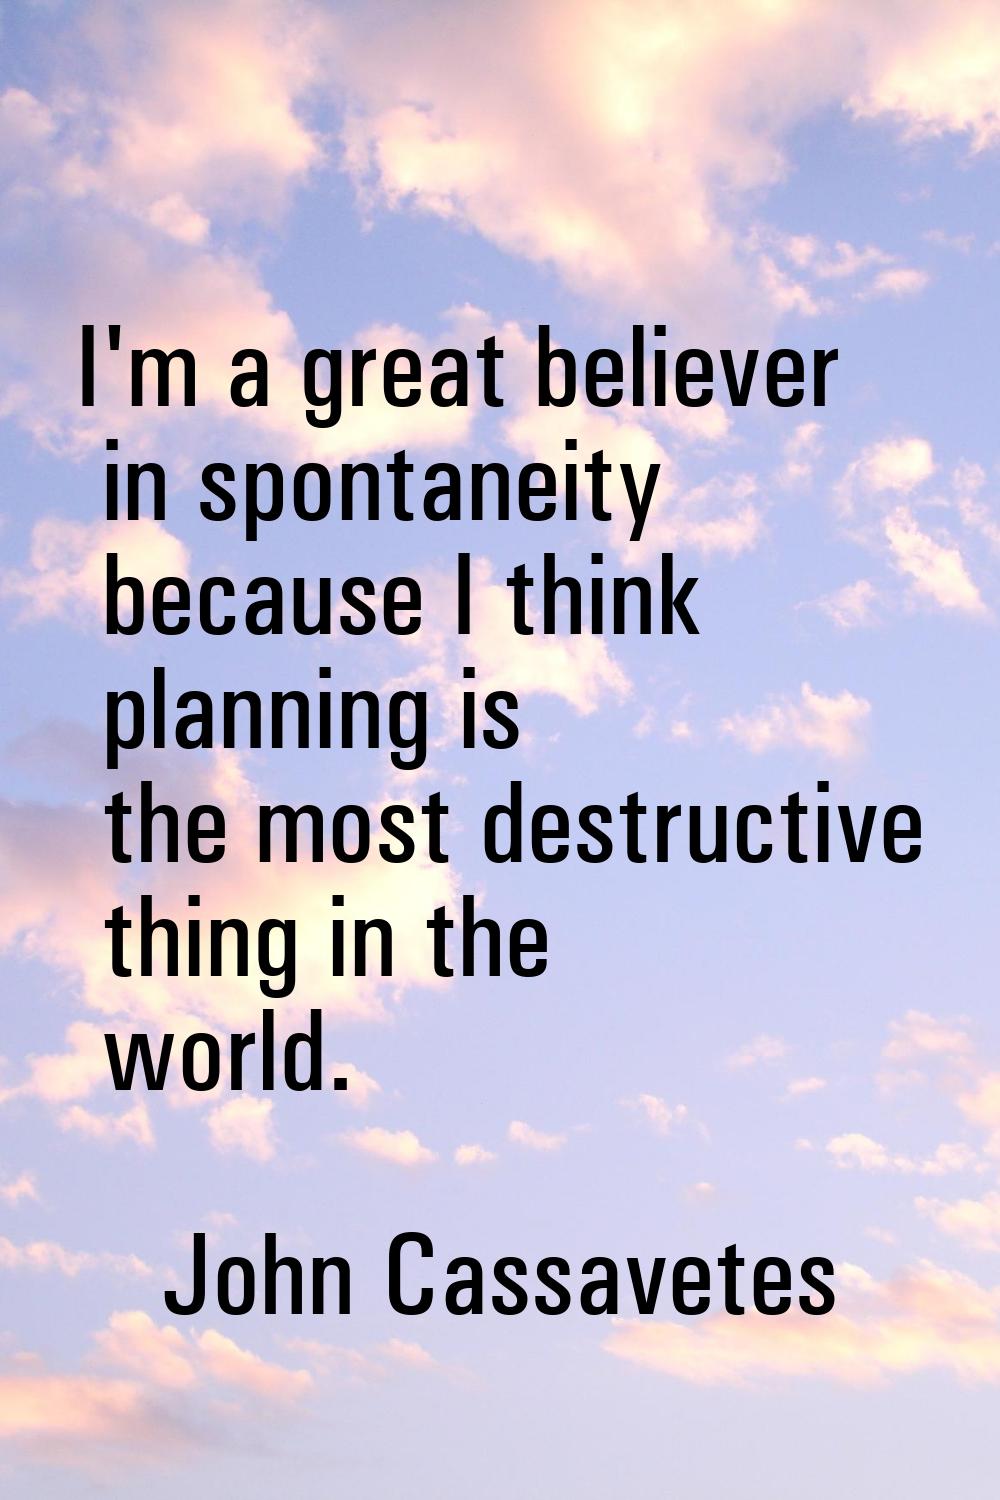 I'm a great believer in spontaneity because I think planning is the most destructive thing in the w